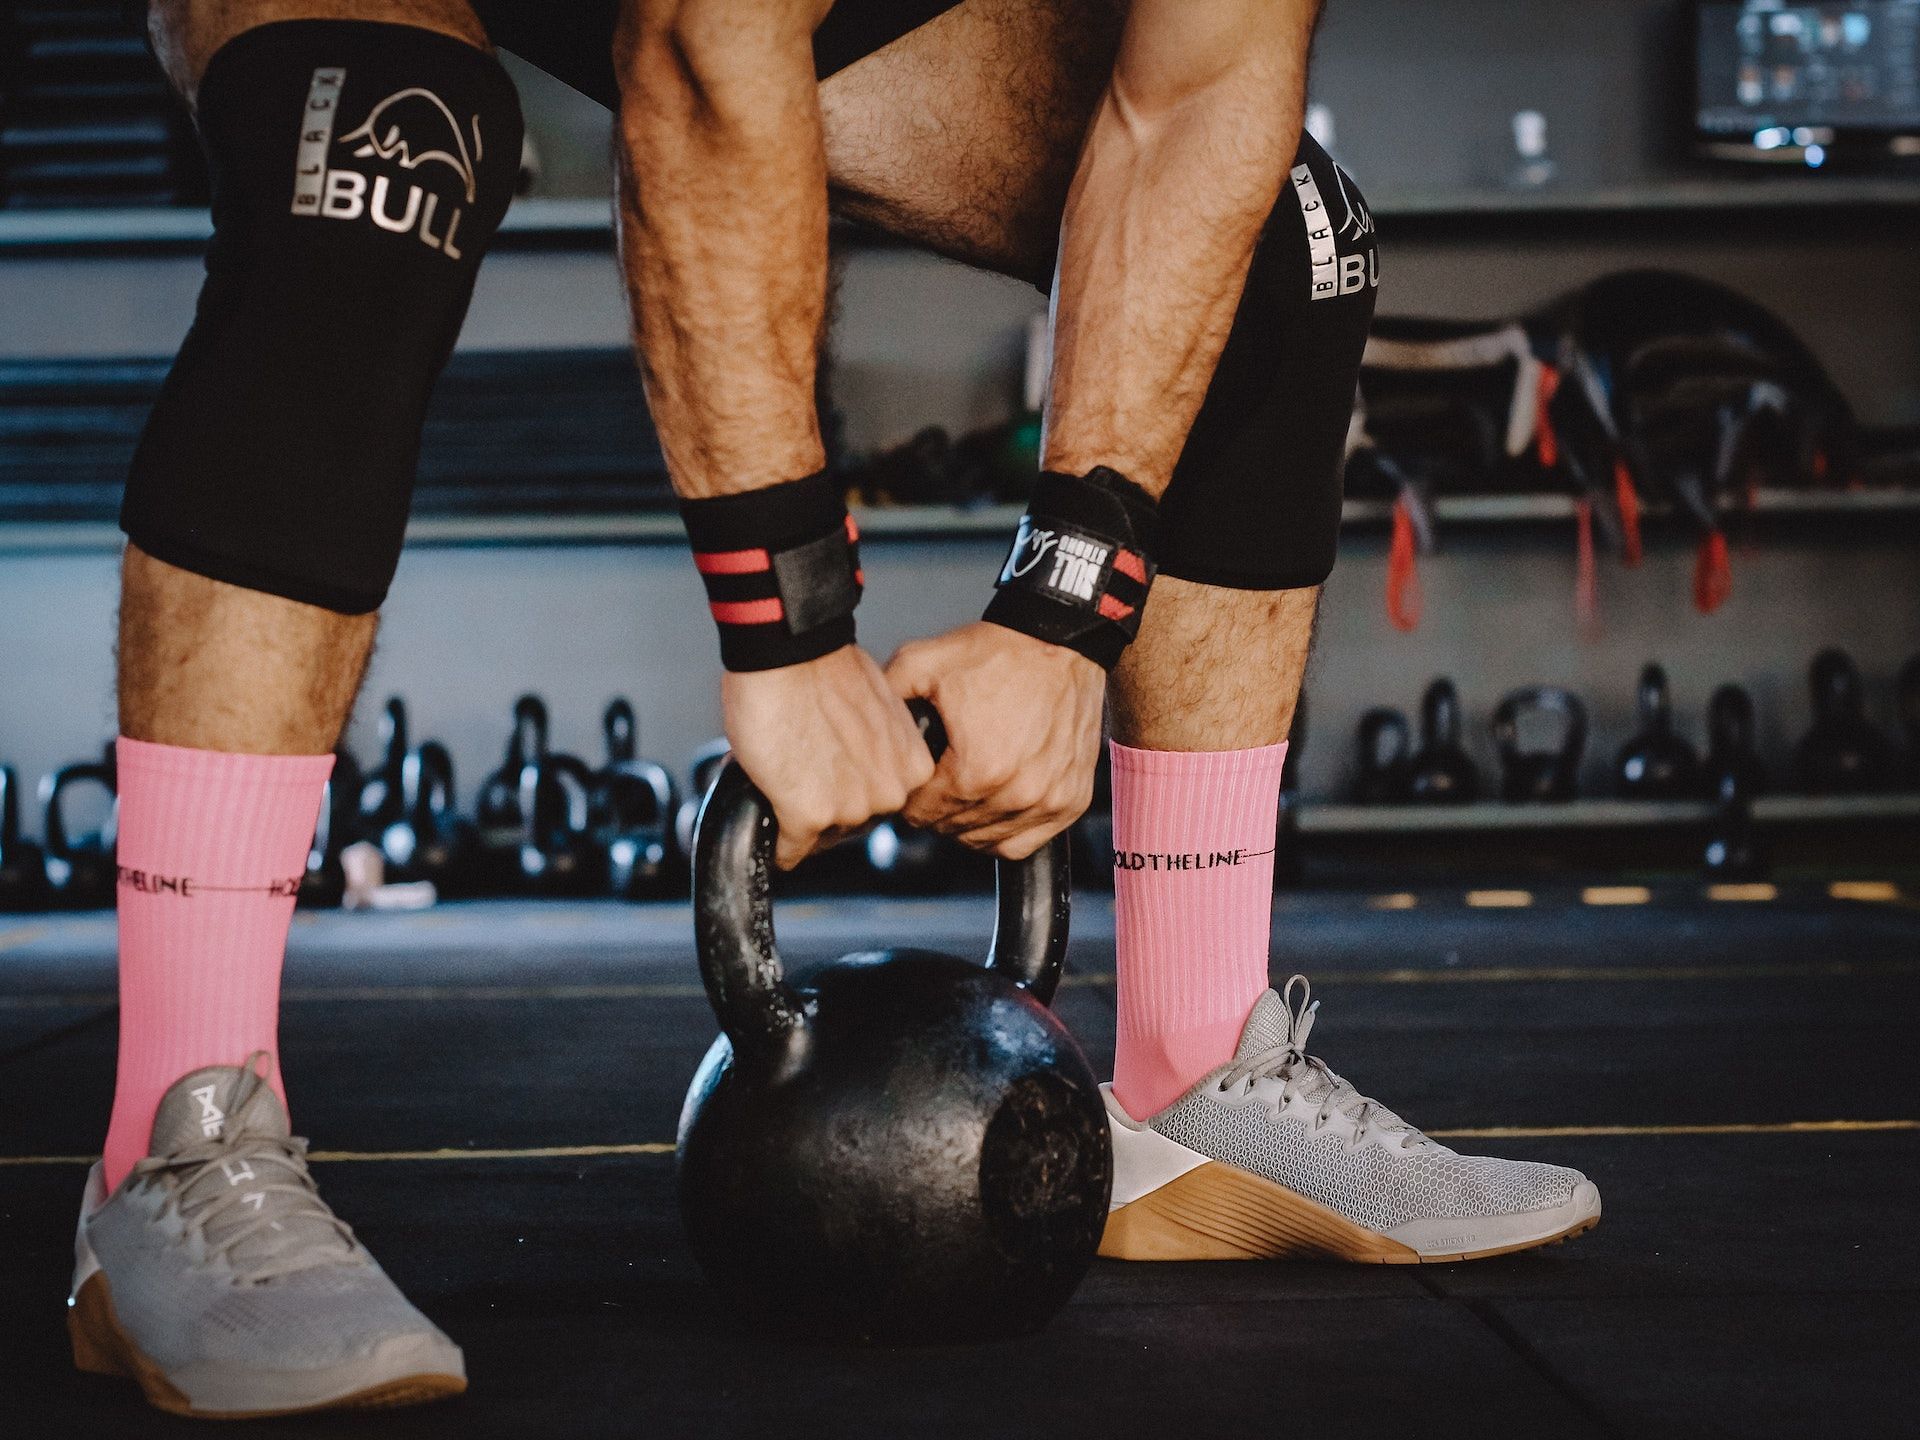 Kettlebell exercises are great to improve upper body strength. (Photo via Pexels/ Geancarlo Peruzzolo)